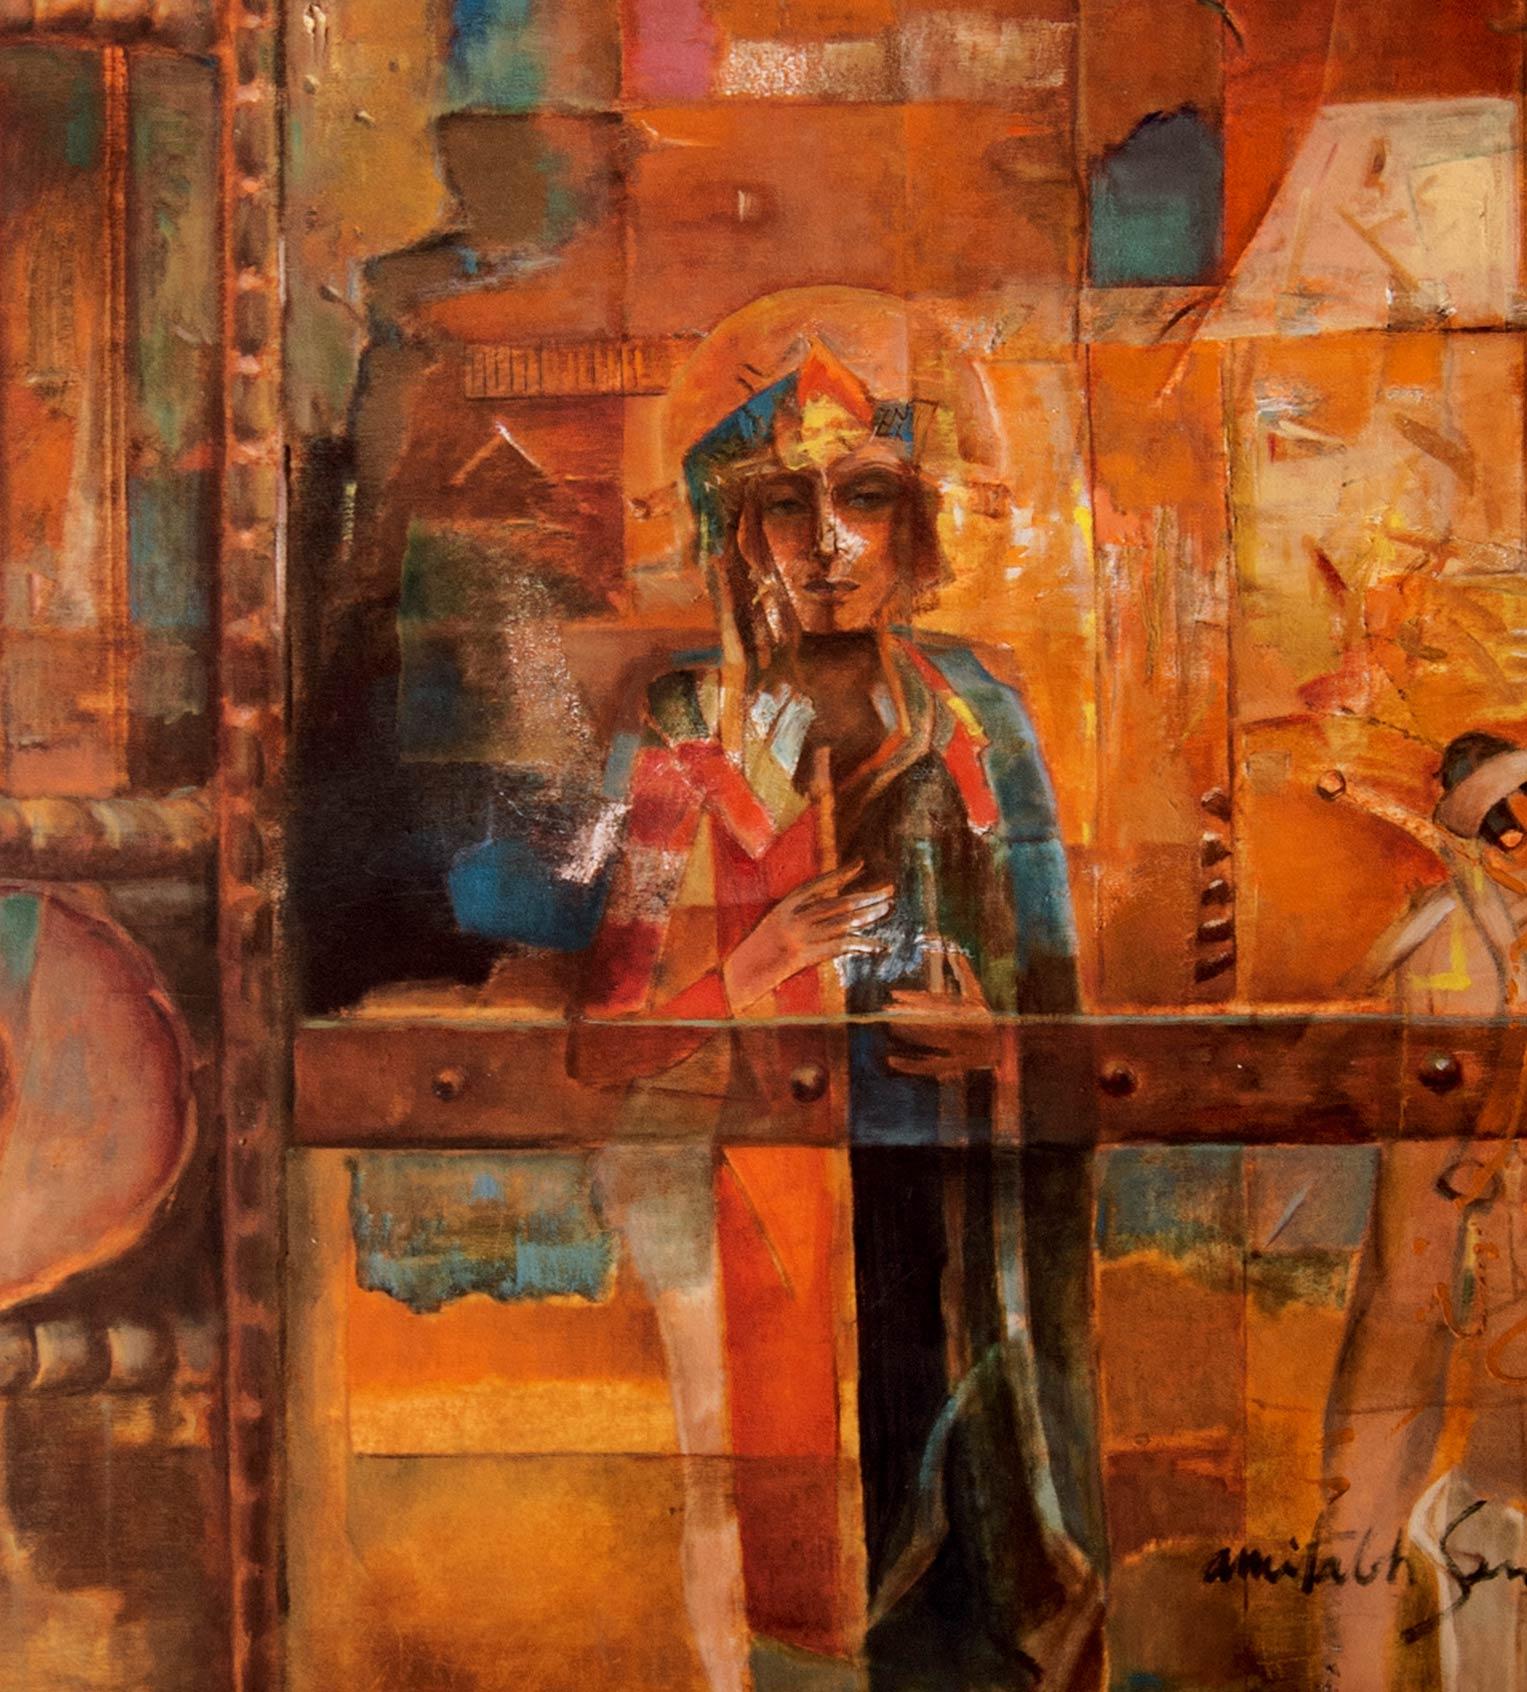 Amitabh Sengupta - Inconsistent Dialogue - 48 x 48 inches (unframed size)
Oil on canvas 
** This work will be shipped in roll form to save on shipping cost.

Mythscape Series : This series emerged in late nineties when the Artist returned to India